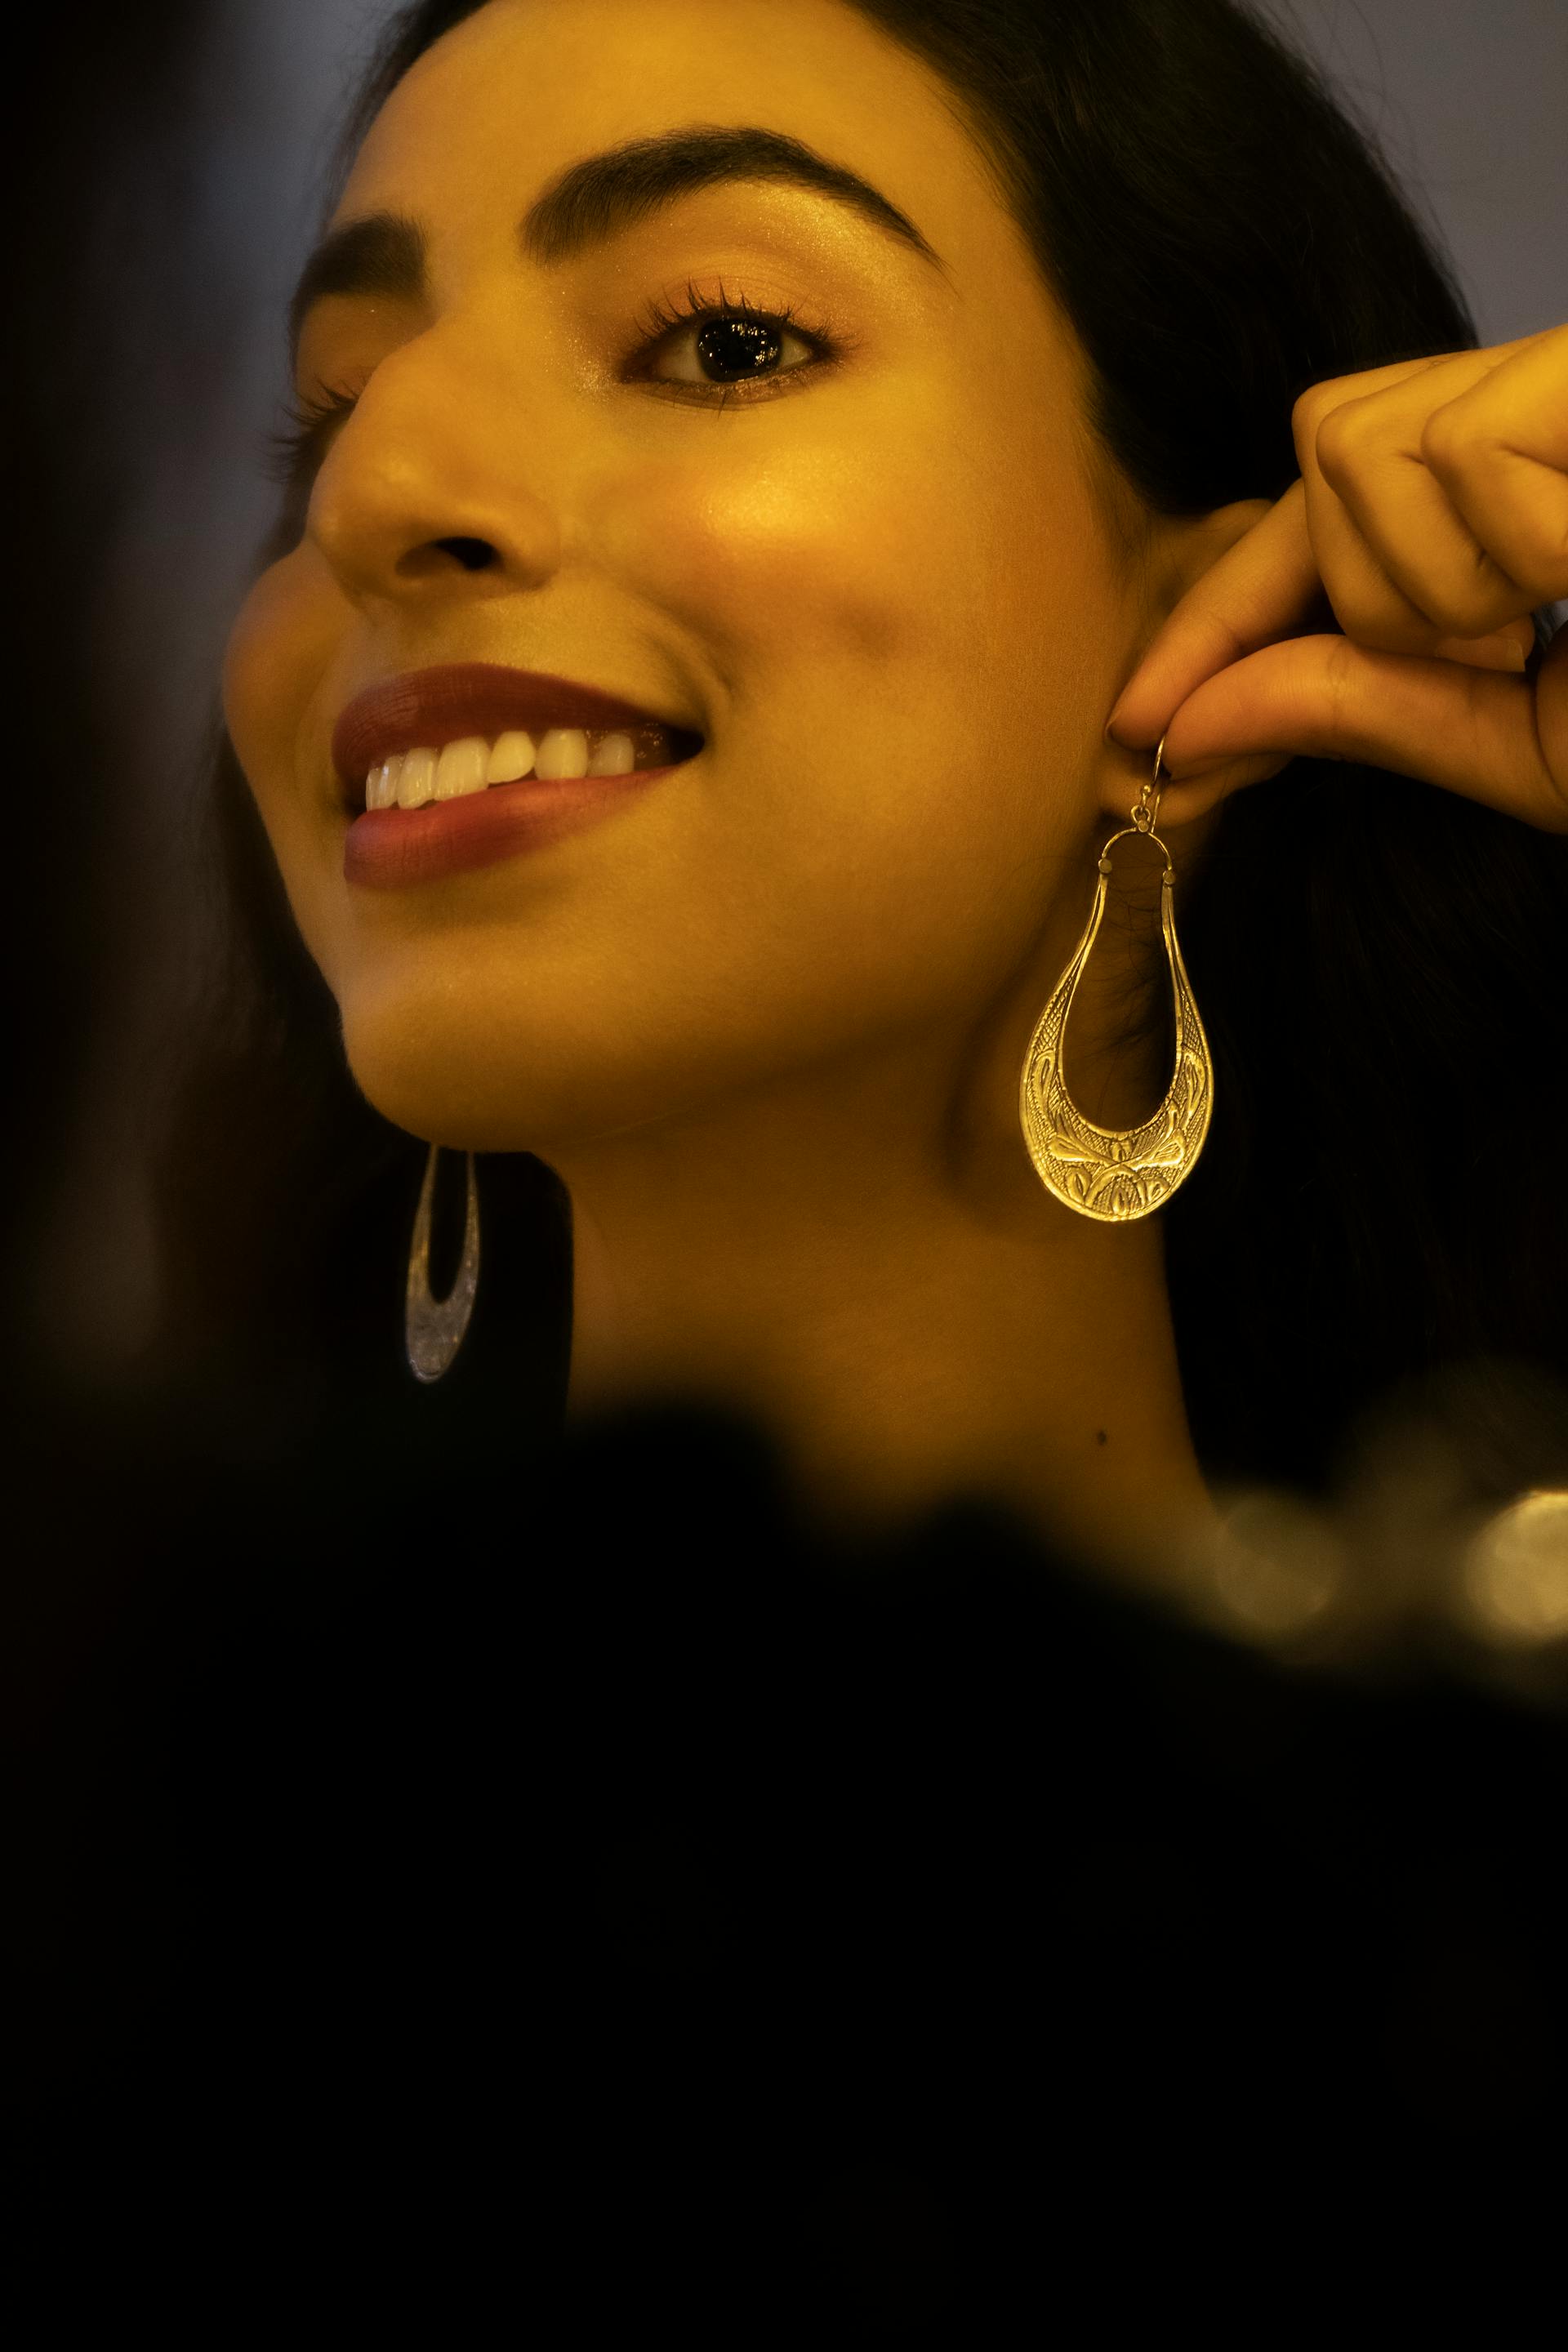 A woman putting on earrings | Source: Pexels